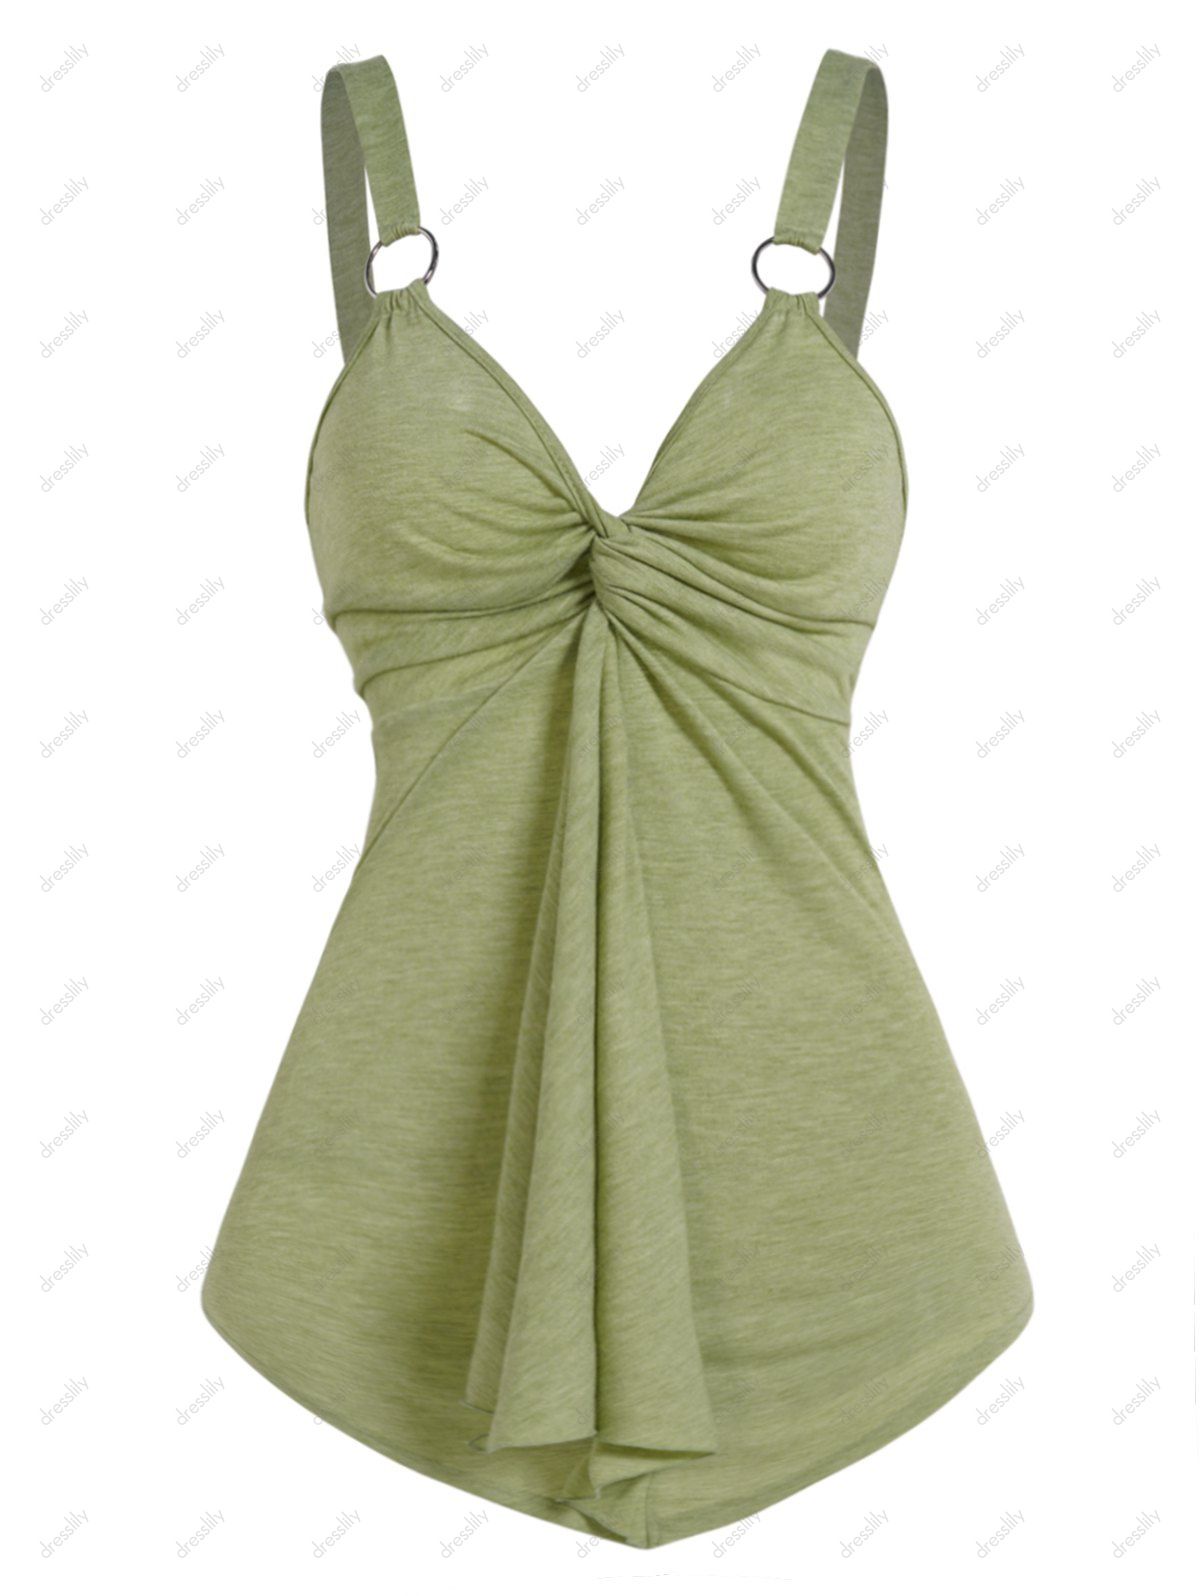 Twist Front Asymmetric Long Tank Top O Ring Strap Plunging Neck Backless Tank Top - LIGHT GREEN XL